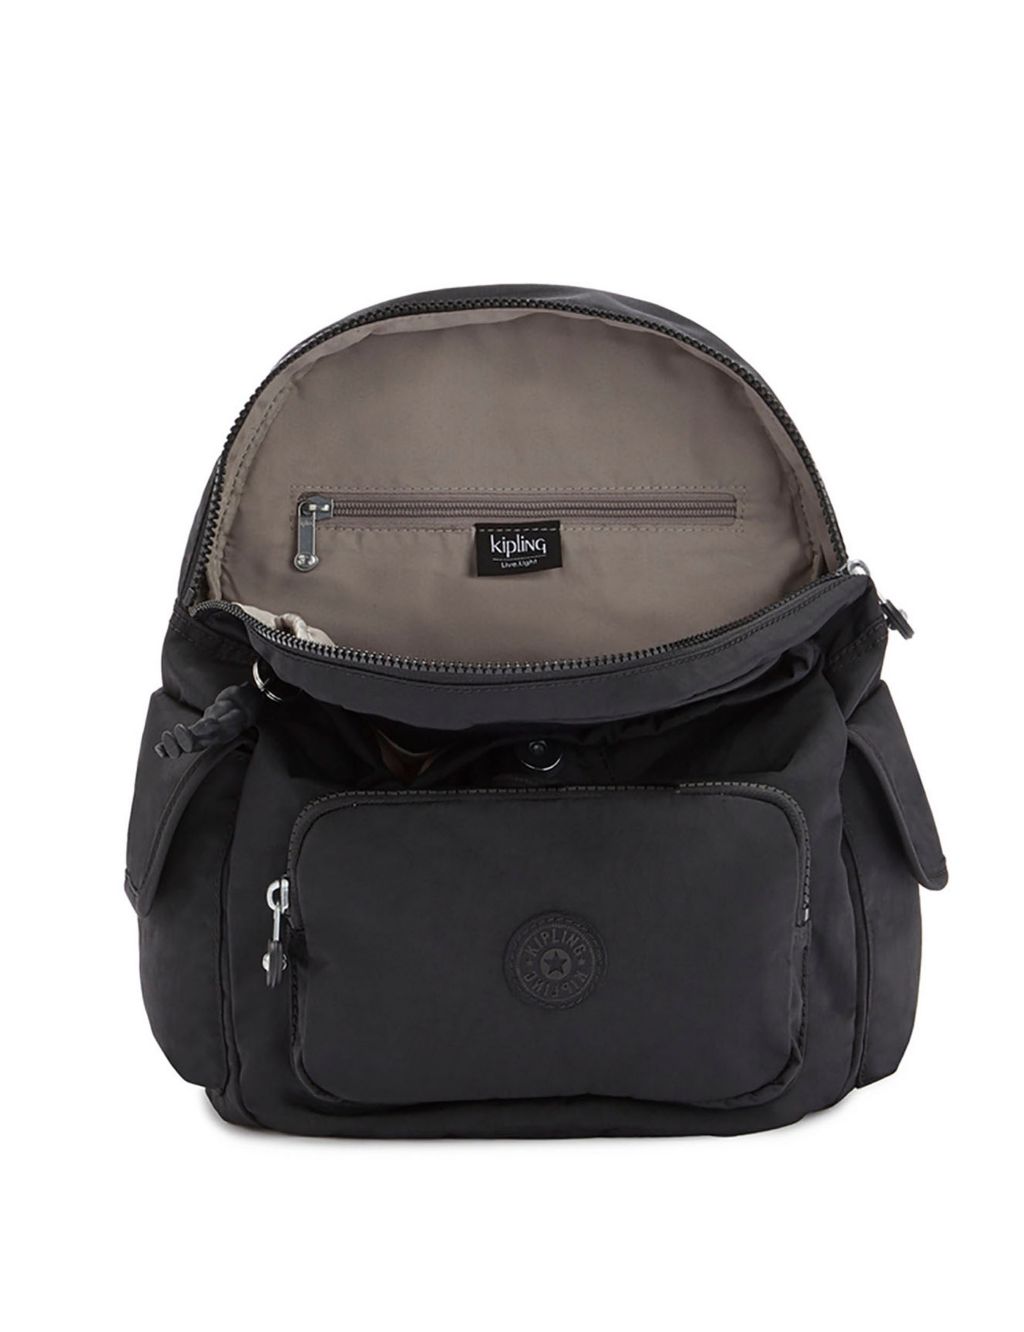 City Pack Water Resistant Backpack image 3